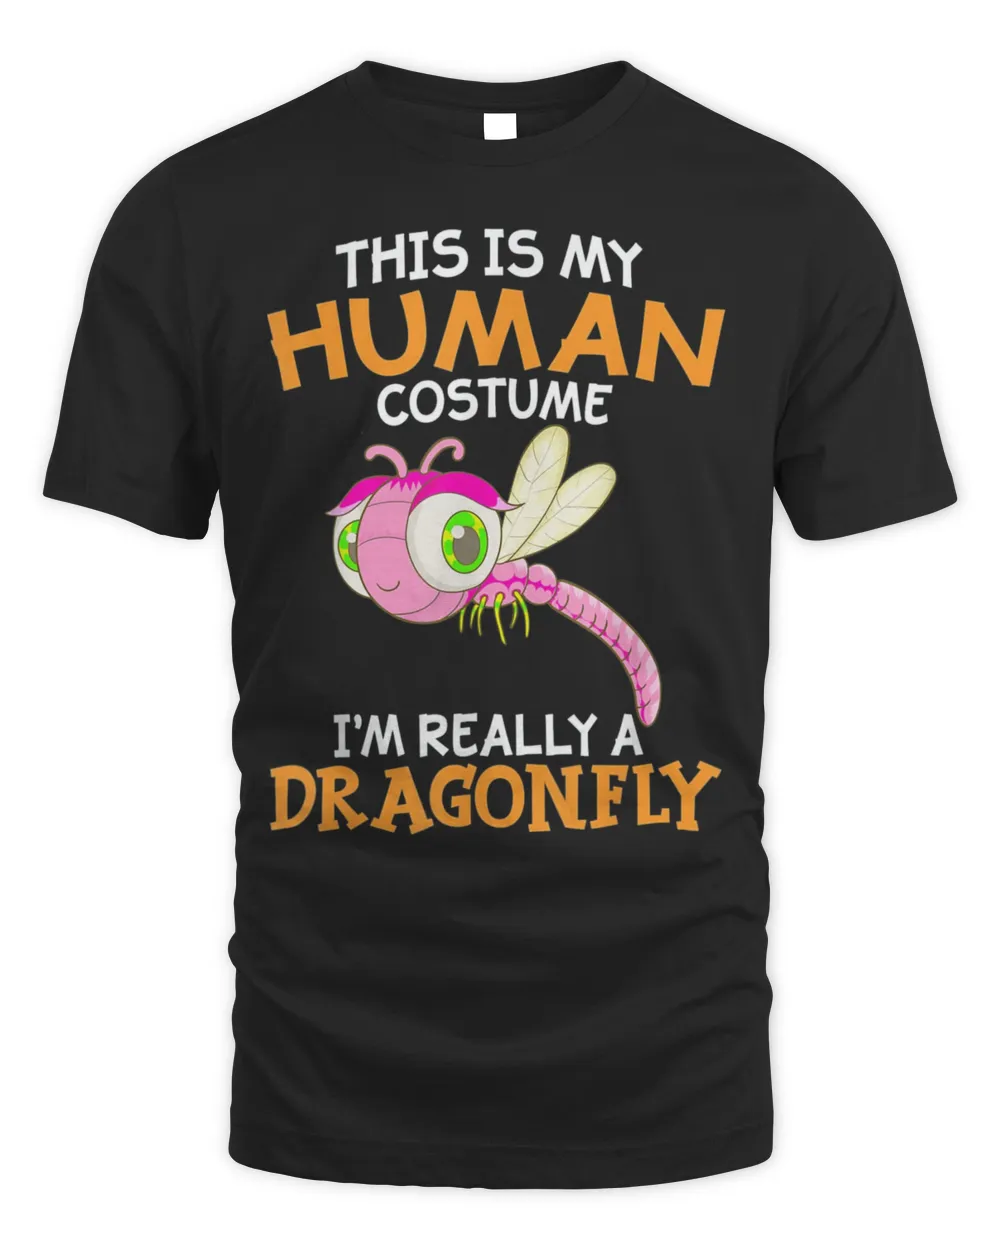 This Is My Human Costume I’m Really A Dragonfly Shirt